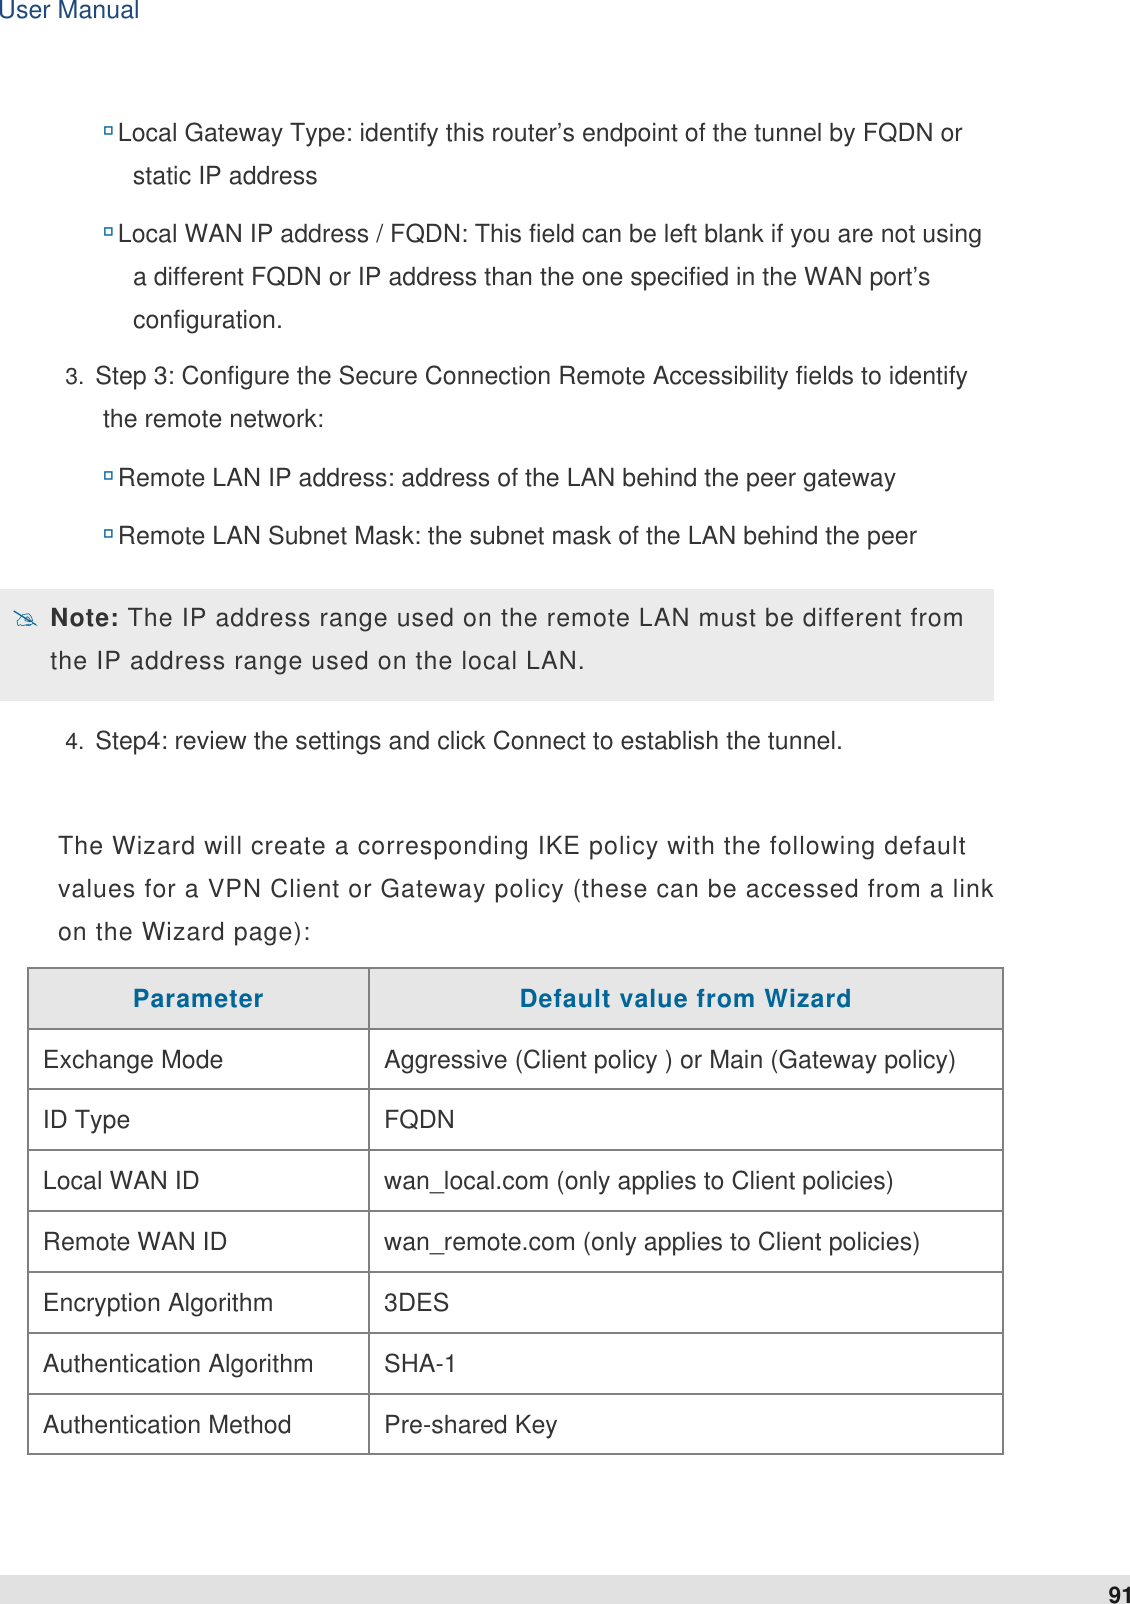 User Manual 91    Local Gateway Type: identify this router’s endpoint of the tunnel by FQDN or static IP address  Local WAN IP address / FQDN: This field can be left blank if you are not using a different FQDN or IP address than the one specified in the WAN port’s configuration. 3.  Step 3: Configure the Secure Connection Remote Accessibility fields to identify the remote network:  Remote LAN IP address: address of the LAN behind the peer gateway  Remote LAN Subnet Mask: the subnet mask of the LAN behind the peer  Note: The IP address range used on the remote LAN must be different from the IP address range used on the local LAN. 4.  Step4: review the settings and click Connect to establish the tunnel.    The Wizard will create a corresponding IKE policy with the following default values for a VPN Client or Gateway policy (these can be accessed from a link on the Wizard page):  Parameter  Default value from Wizard Exchange Mode  Aggressive (Client policy ) or Main (Gateway policy)    ID Type  FQDN Local WAN ID  wan_local.com (only applies to Client policies) Remote WAN ID  wan_remote.com (only applies to Client policies) Encryption Algorithm  3DES Authentication Algorithm  SHA-1 Authentication Method  Pre-shared Key 